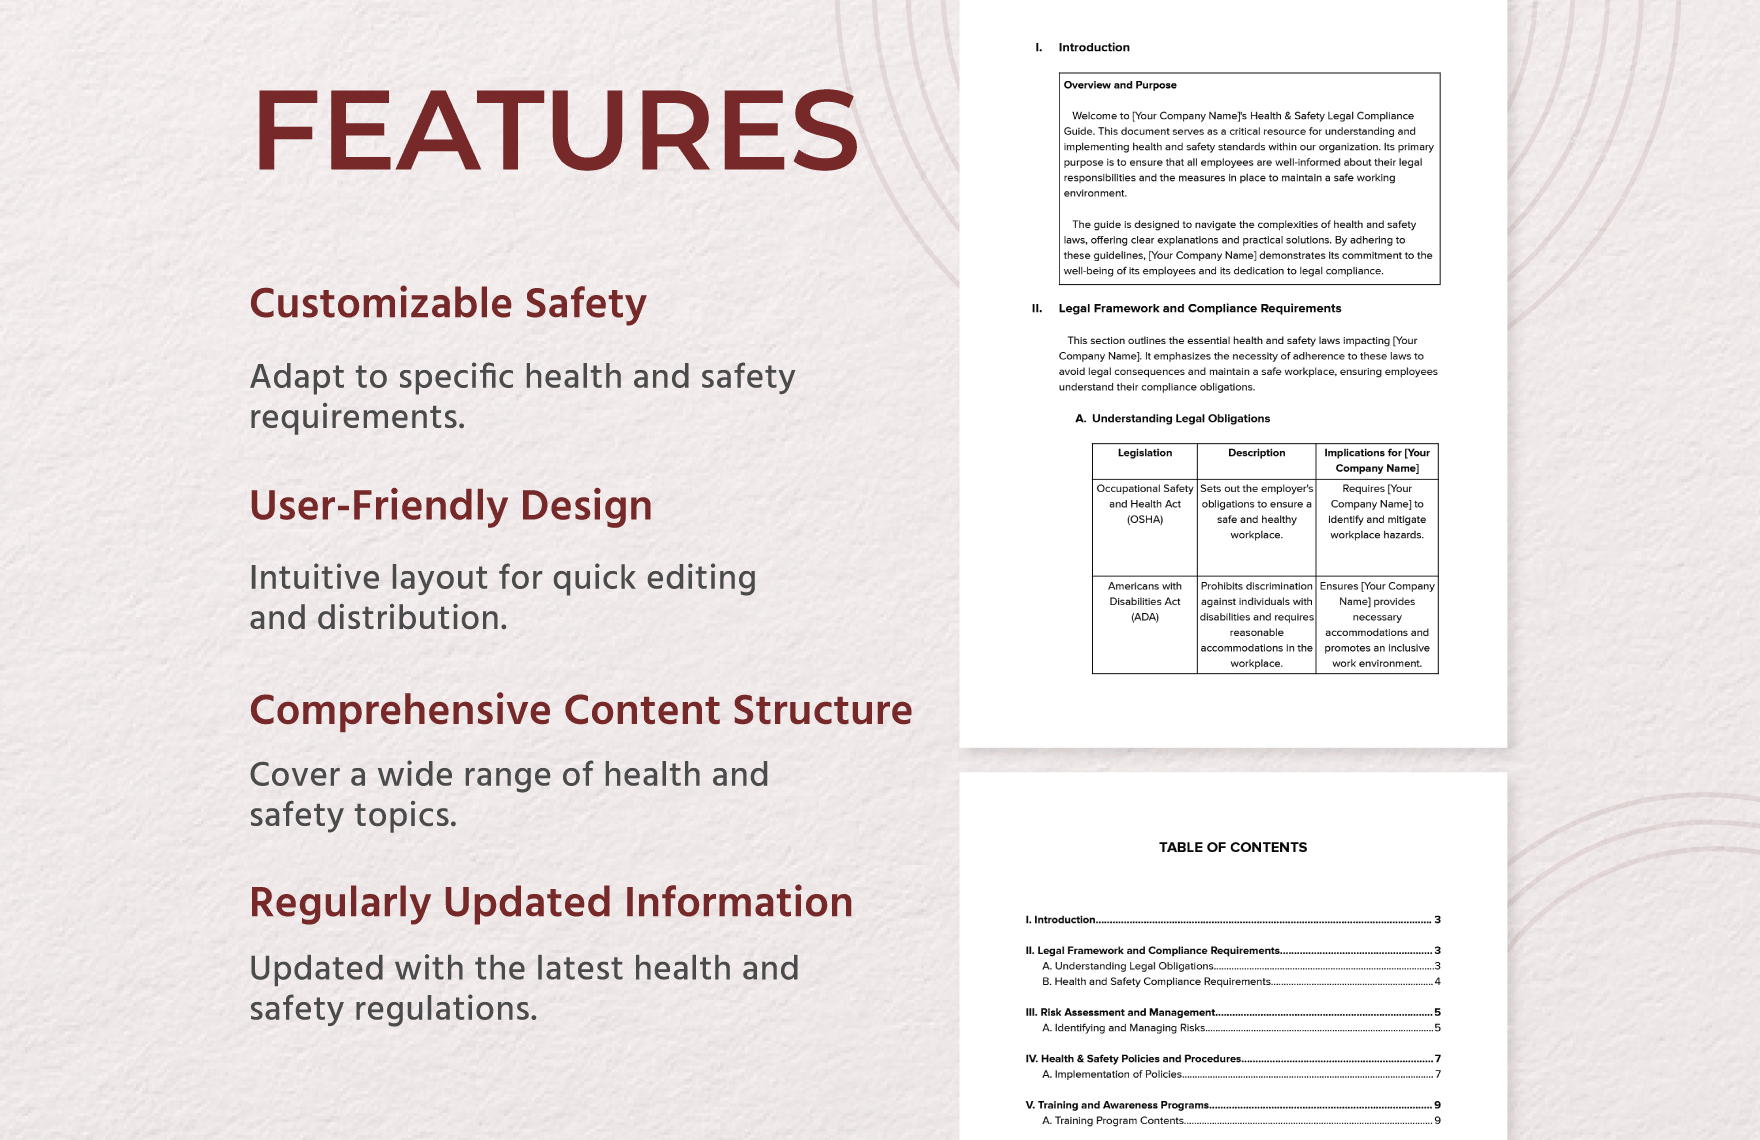 Health & Safety Legal Compliance Guide Template